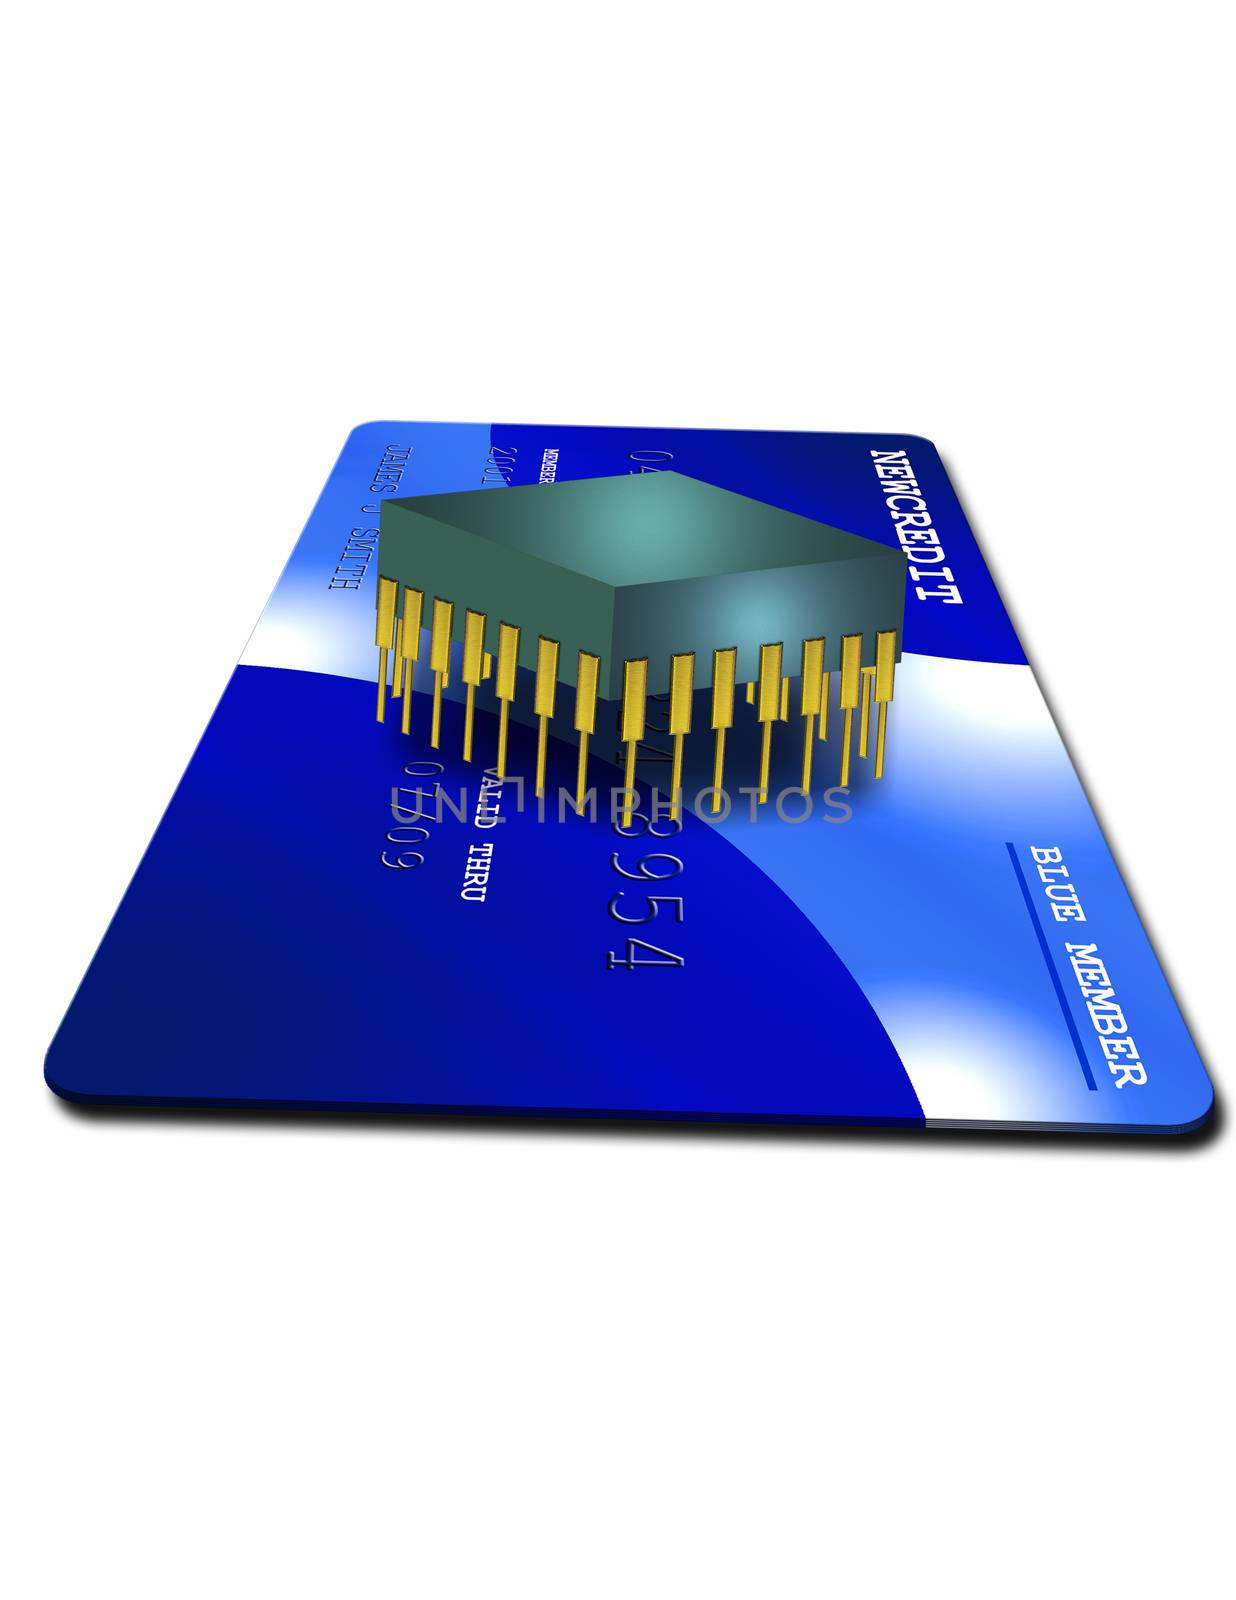 Microchip on bank card by applesstock